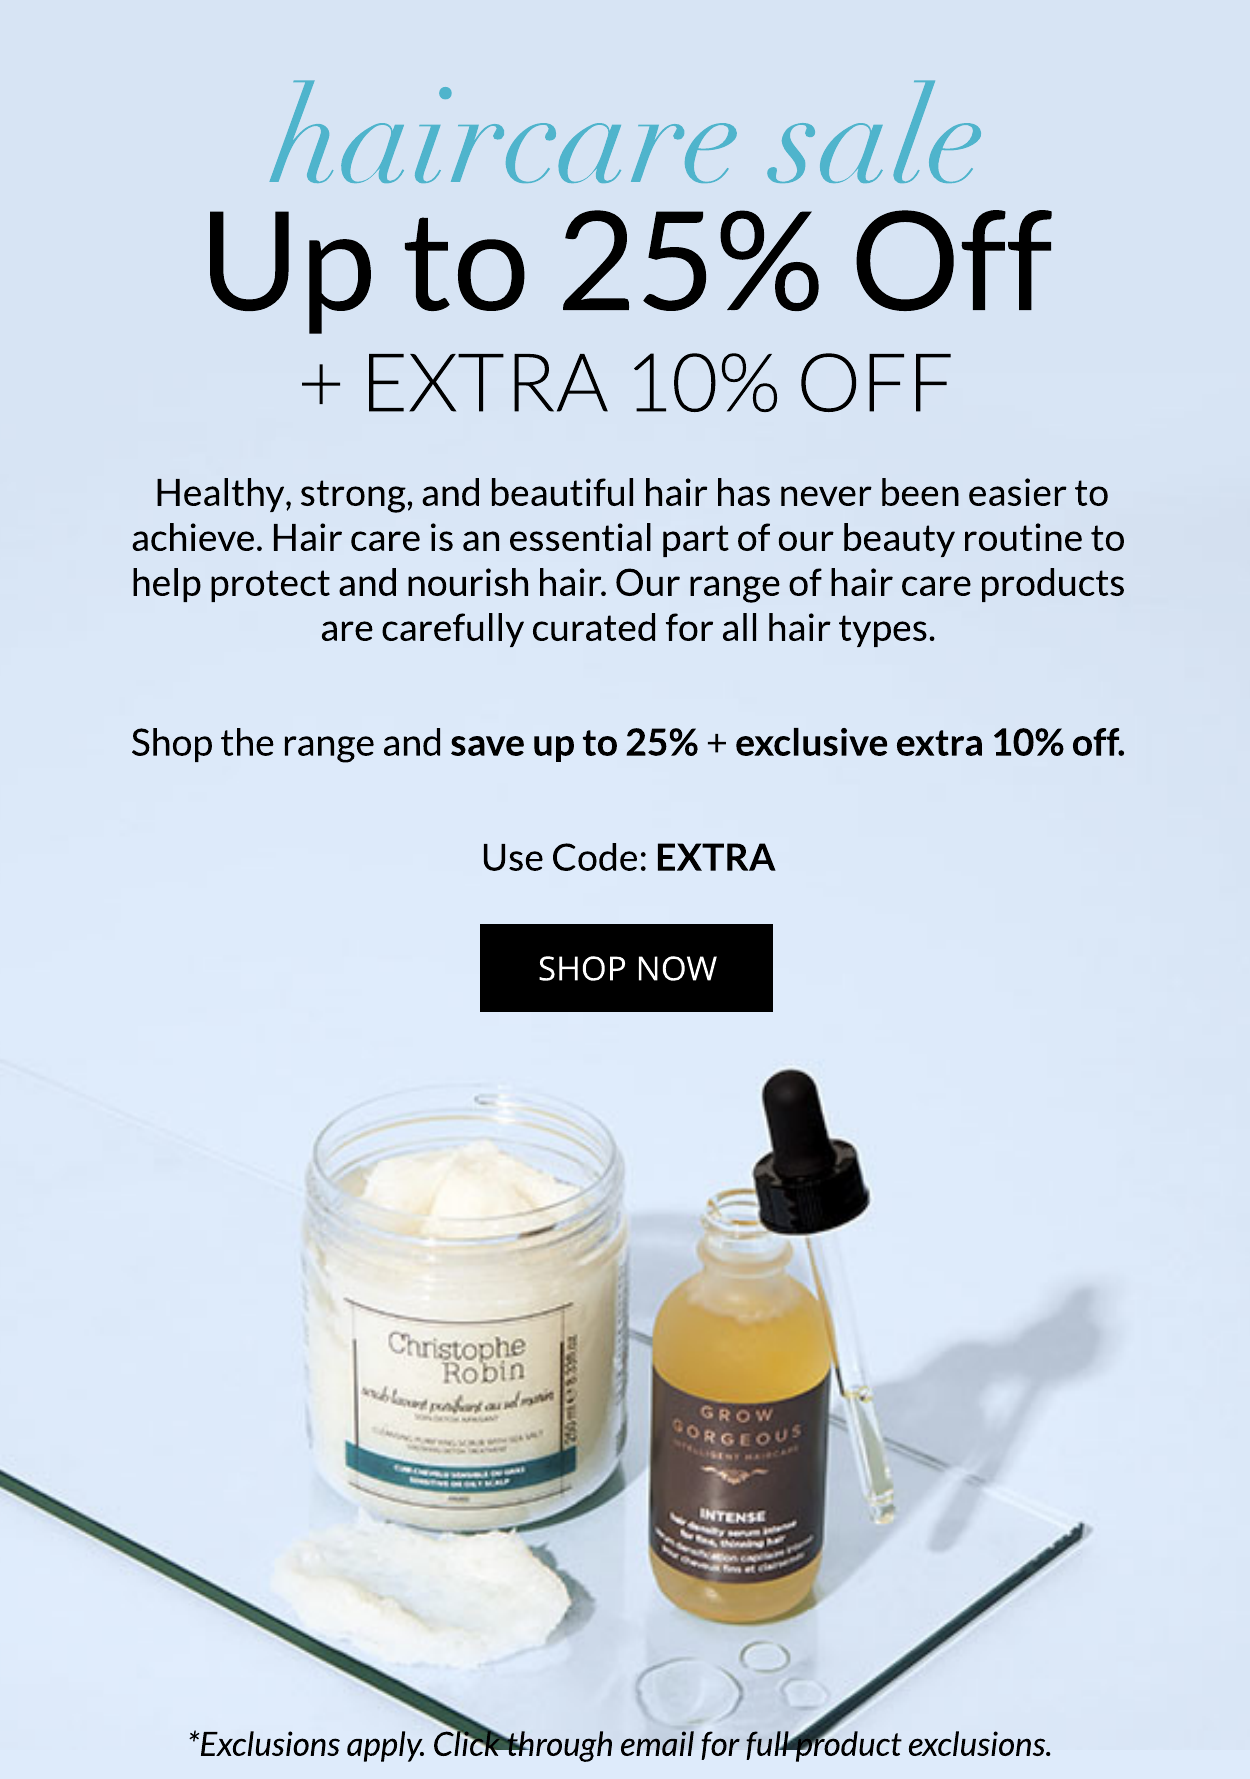 Save up to 25% on Haircare + Extra 10% off!